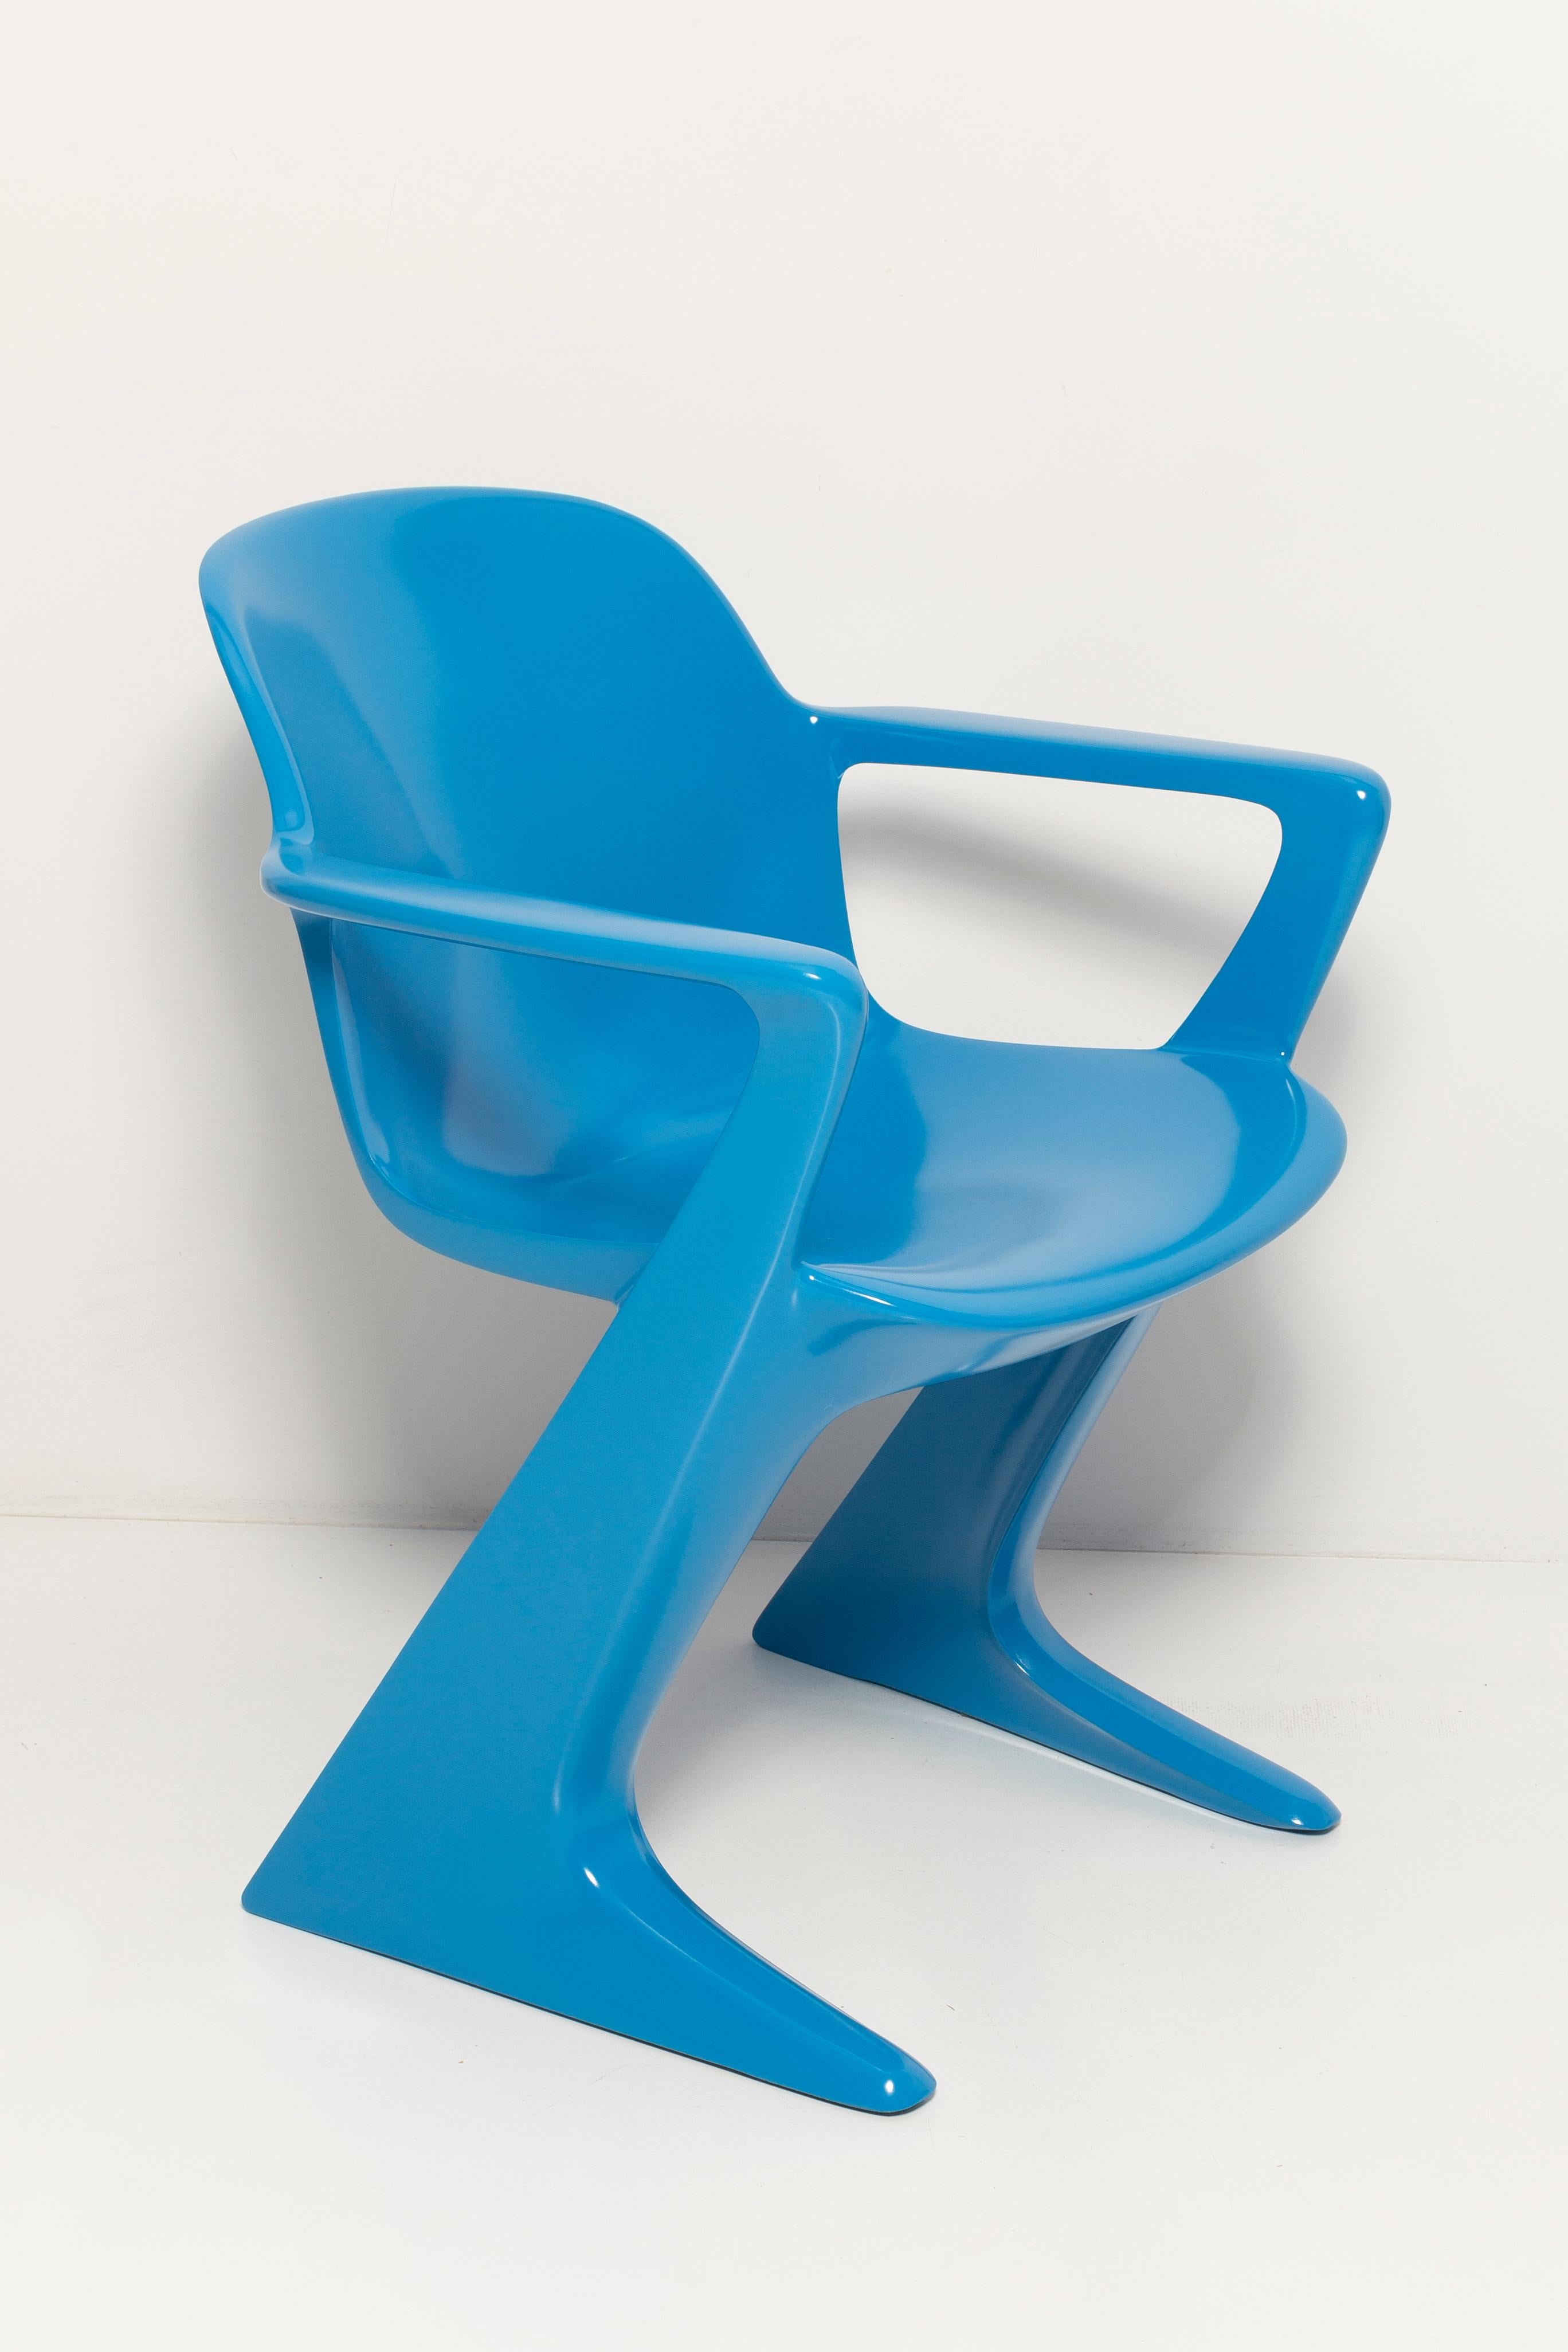 This model is called Z-chair. Designed in 1968 in the GDR by Ernst Moeckl and Siegfried Mehl, German Version of the Panton chair. Also called kangaroo chair or variopur chair. Produced in eastern Germany.

Chair is after full renovation, new semi